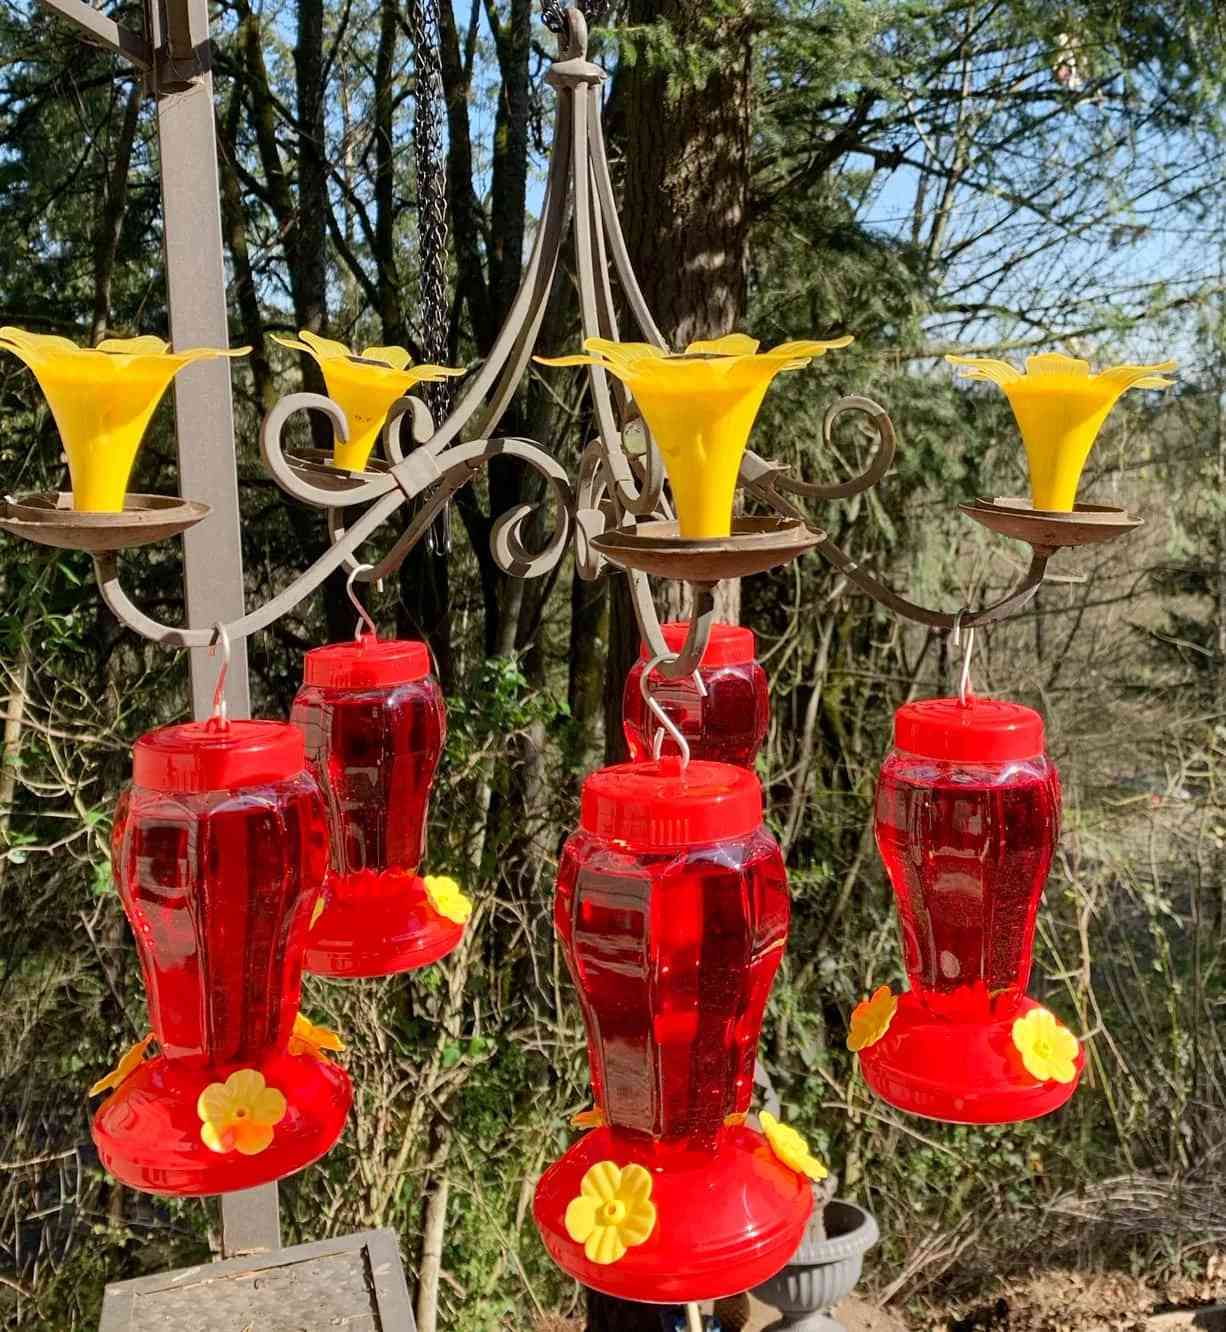 A chandelier with hummingbird feeders